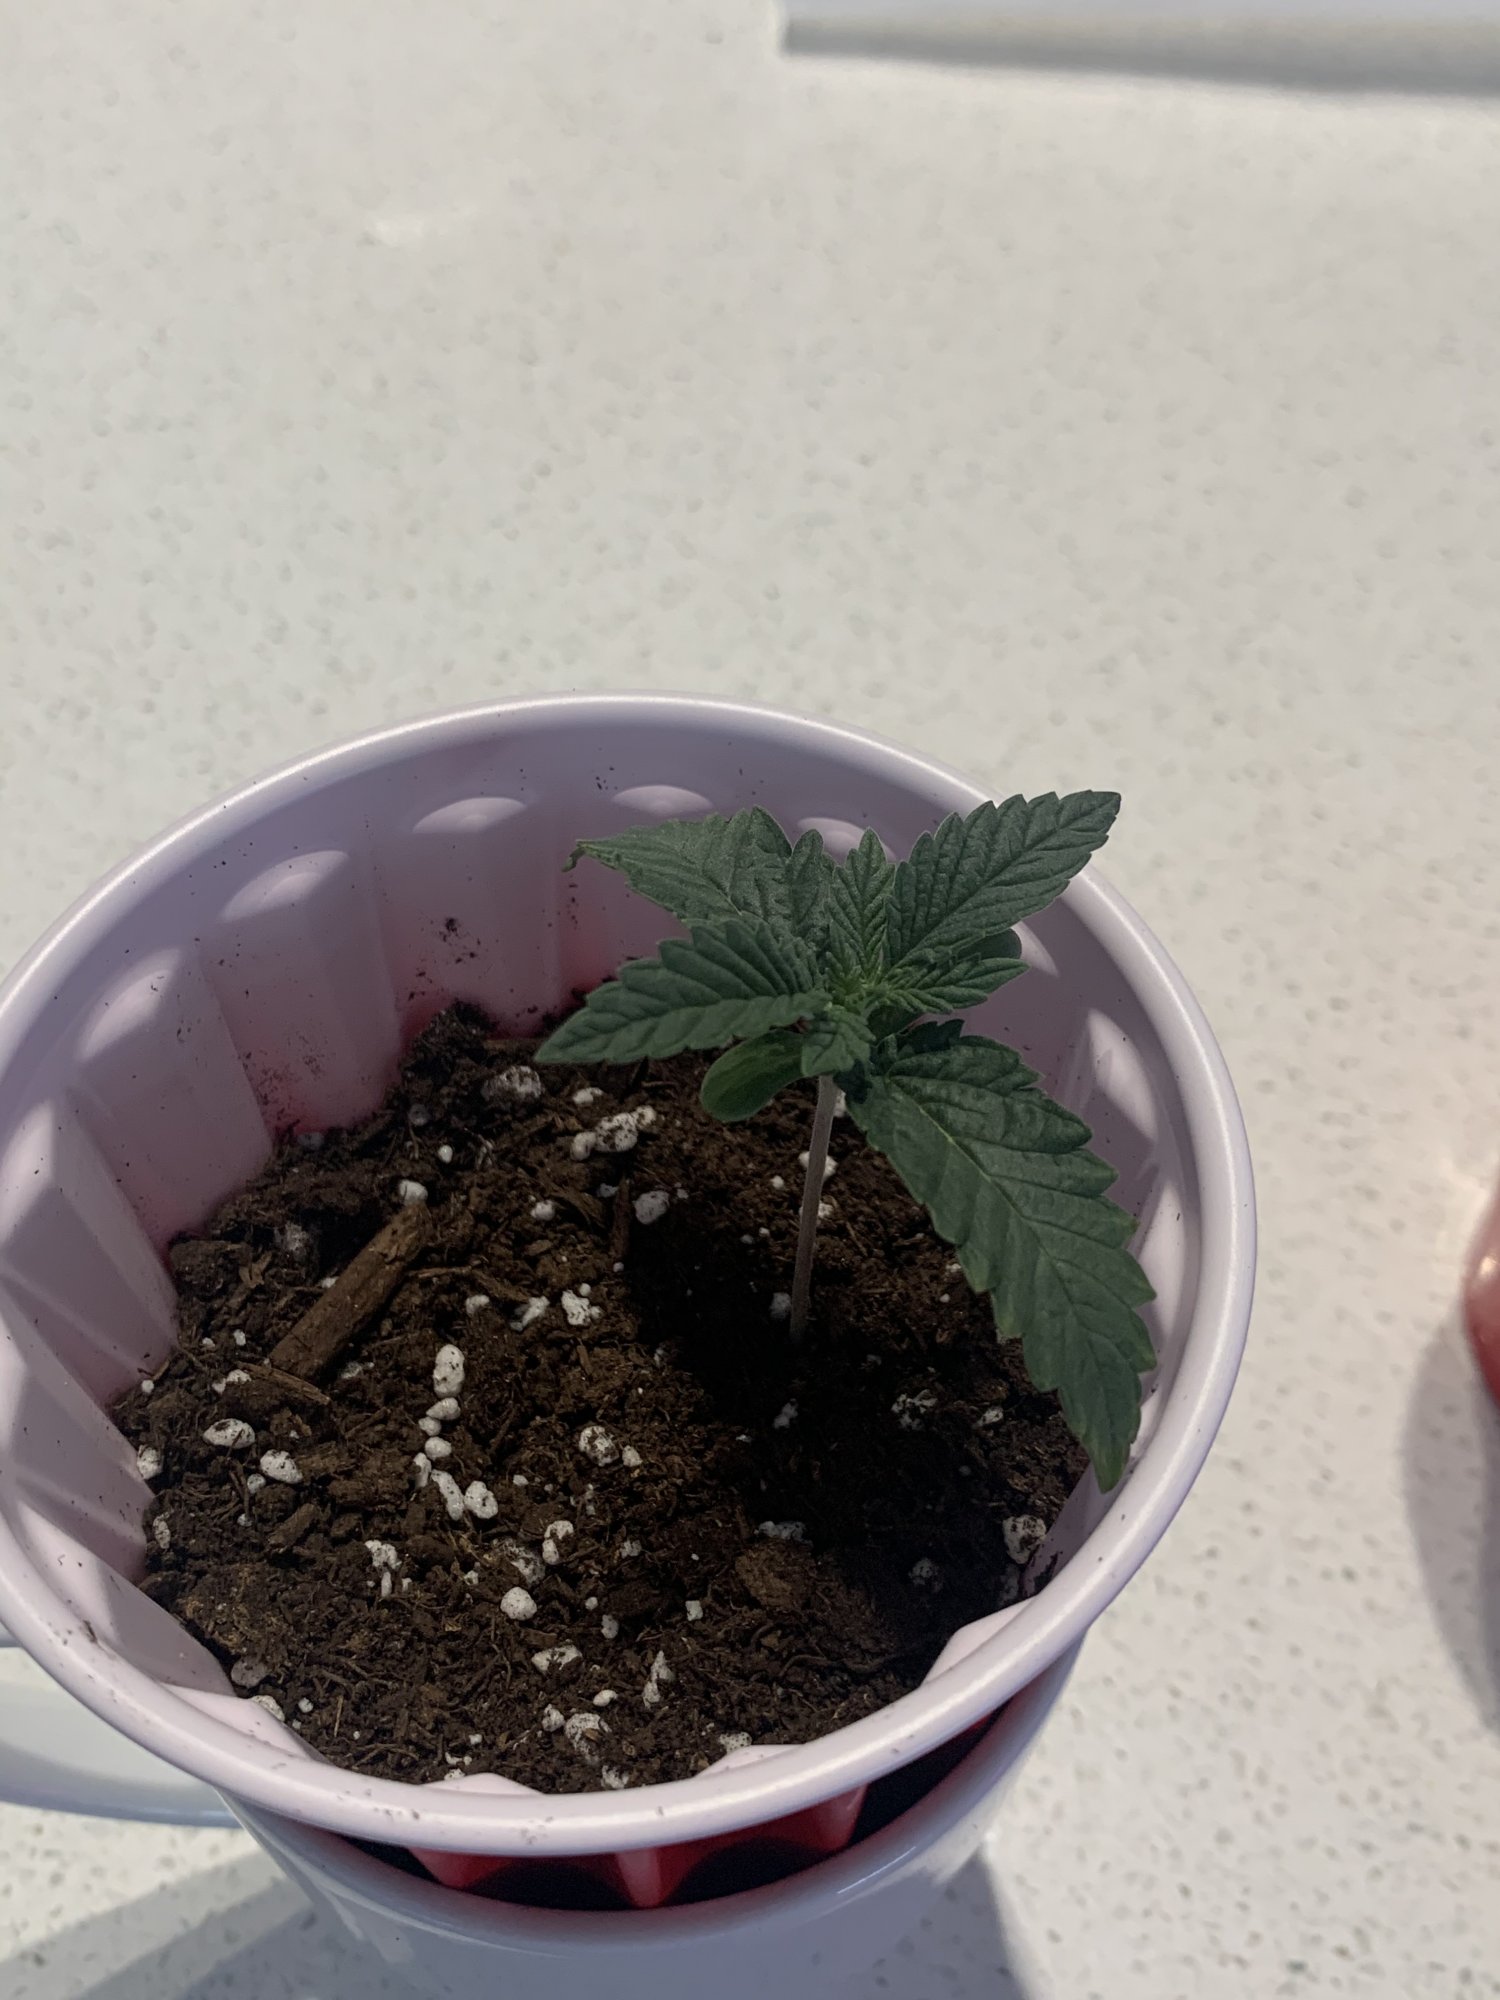 Newbie first timer trying to grow do the plants look alright